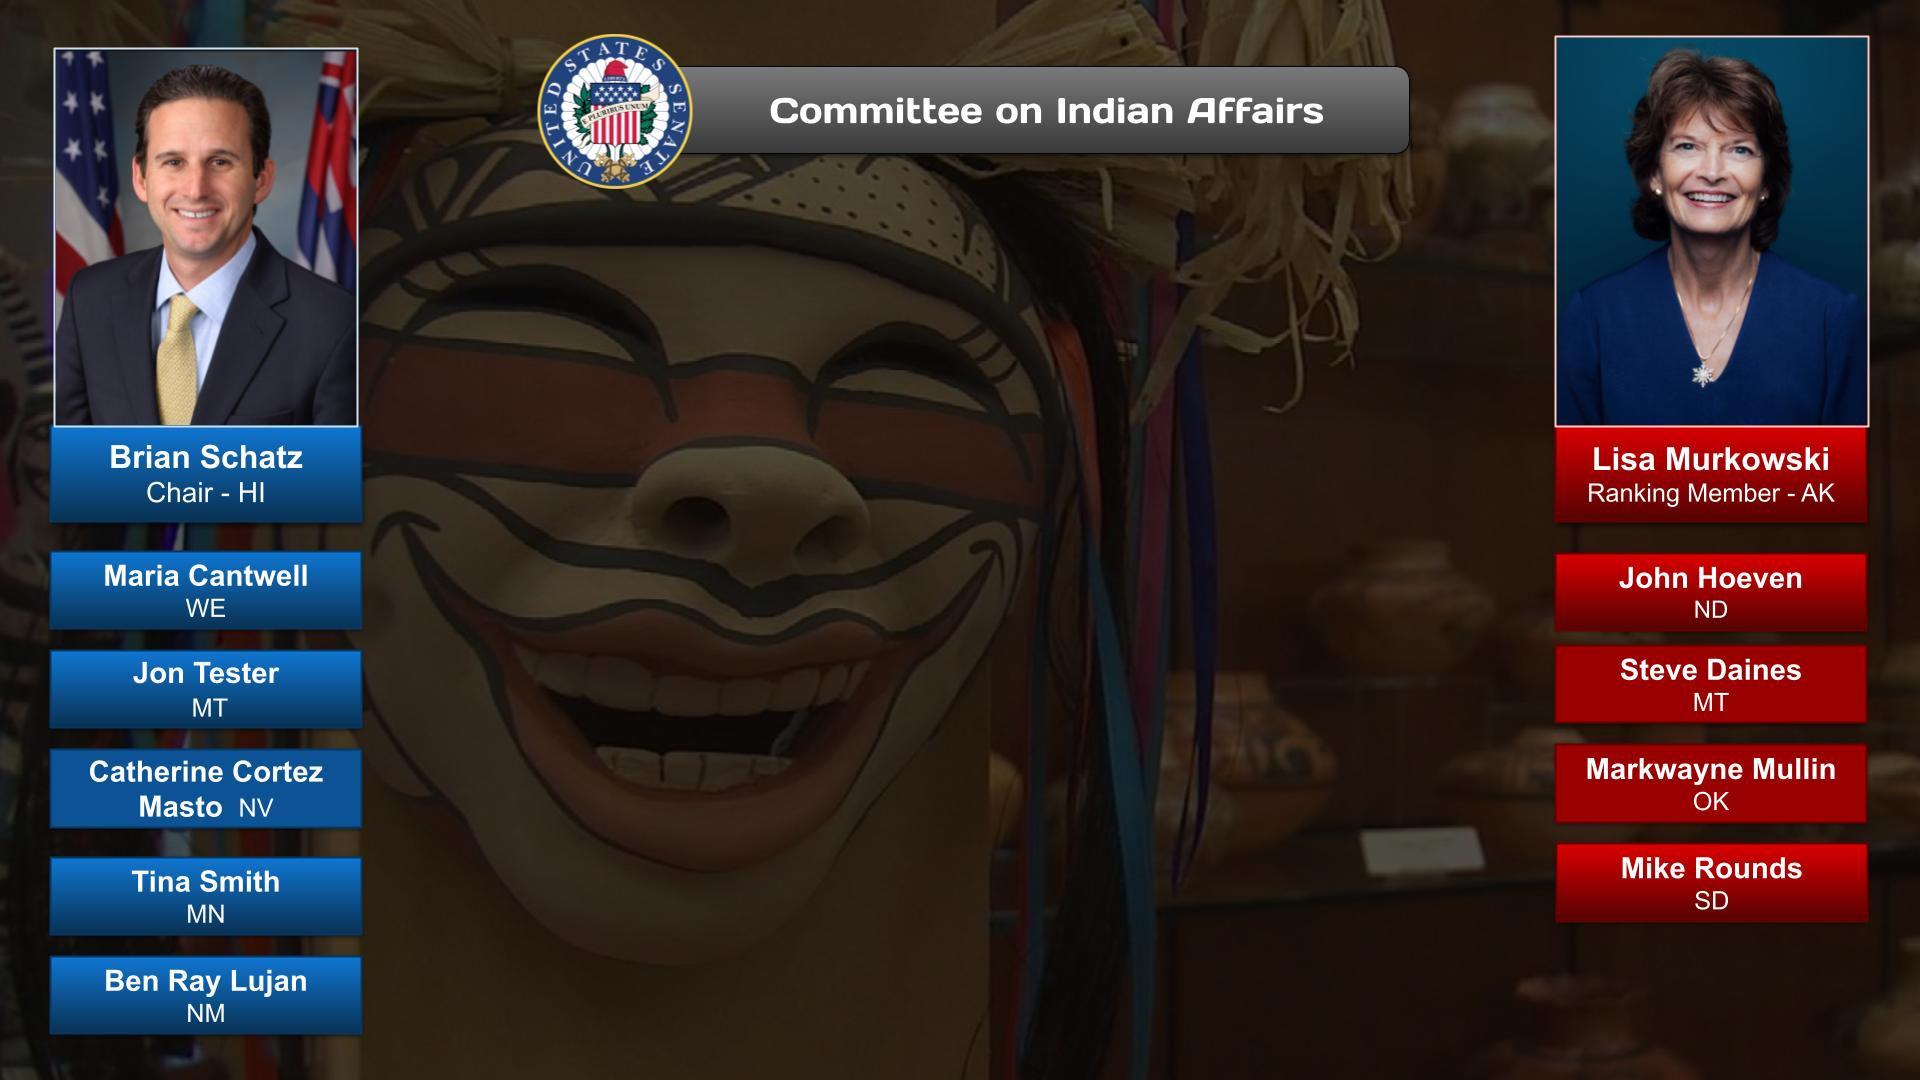 Committee on Indian Affairs